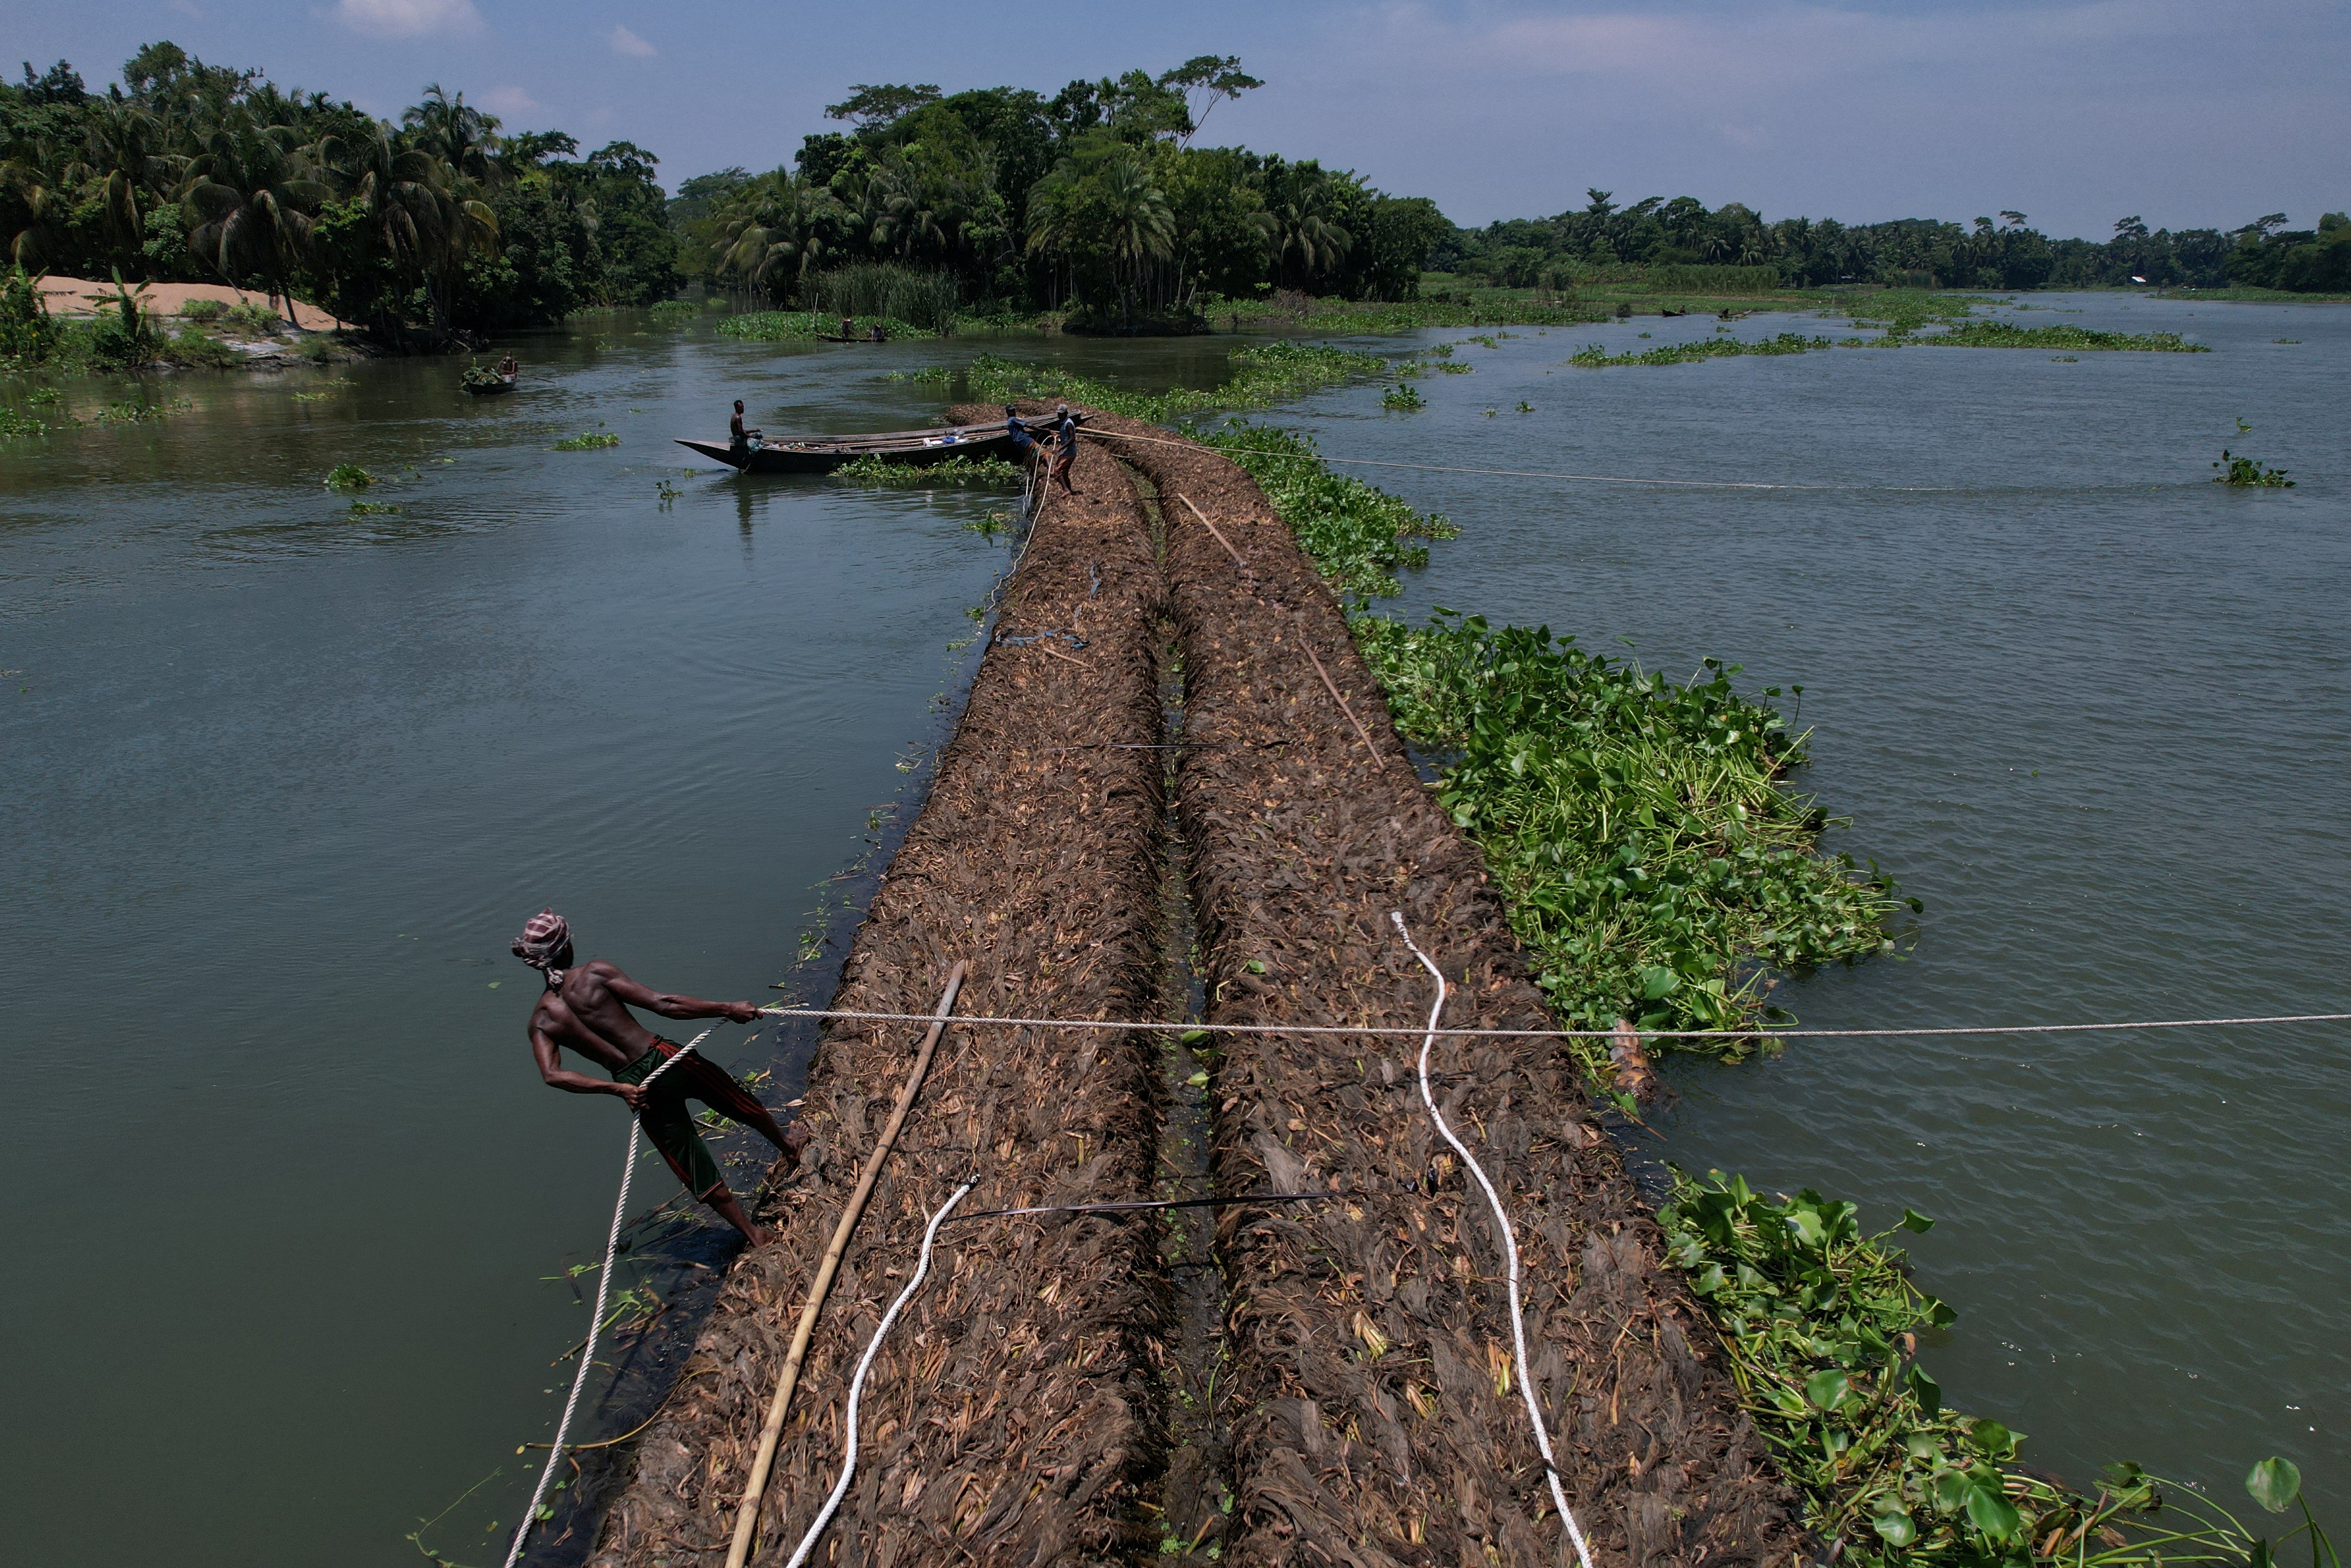 A man holds a rope as people transport floating beds towards a farm through the Belua river